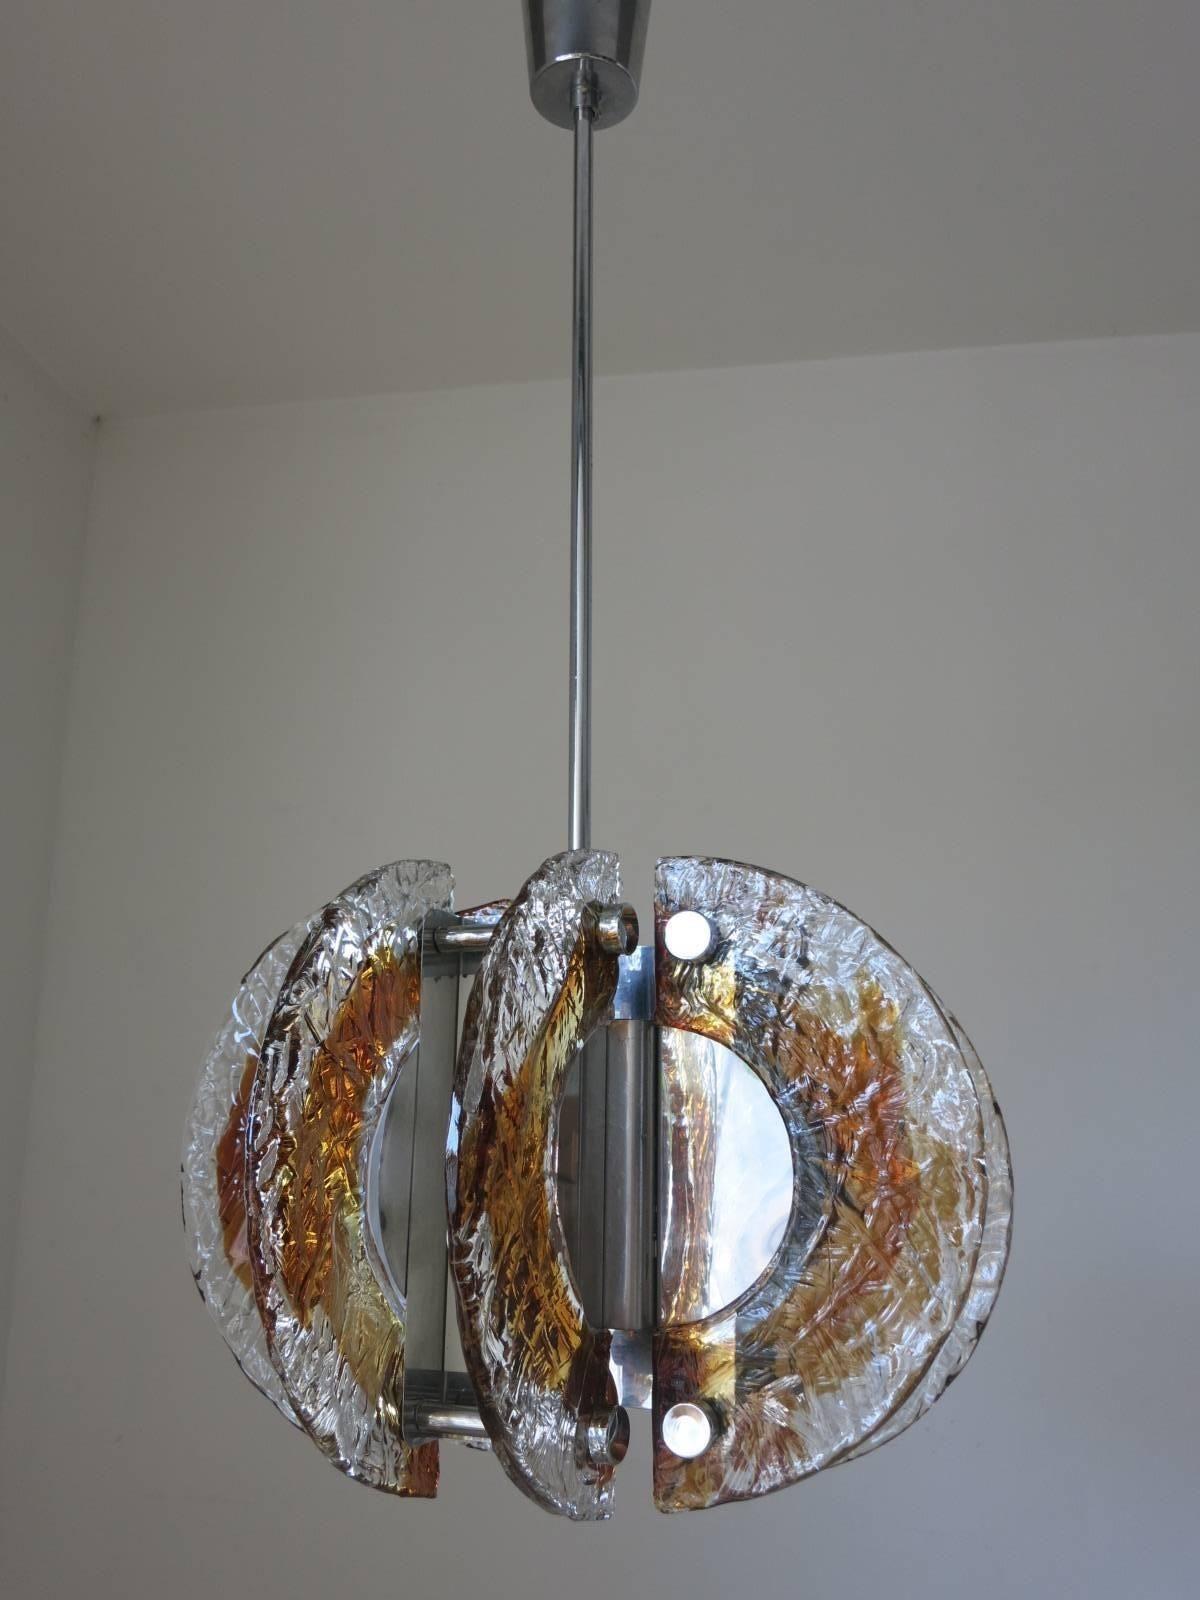 Vintage Italian pendant with clear and amber Murano glasses hand blown into half moon shapes, mounted on chrome frame. Designed by Mazzega, Italy, circa 1960s. 
Dimensions (including rod & canopy)
36